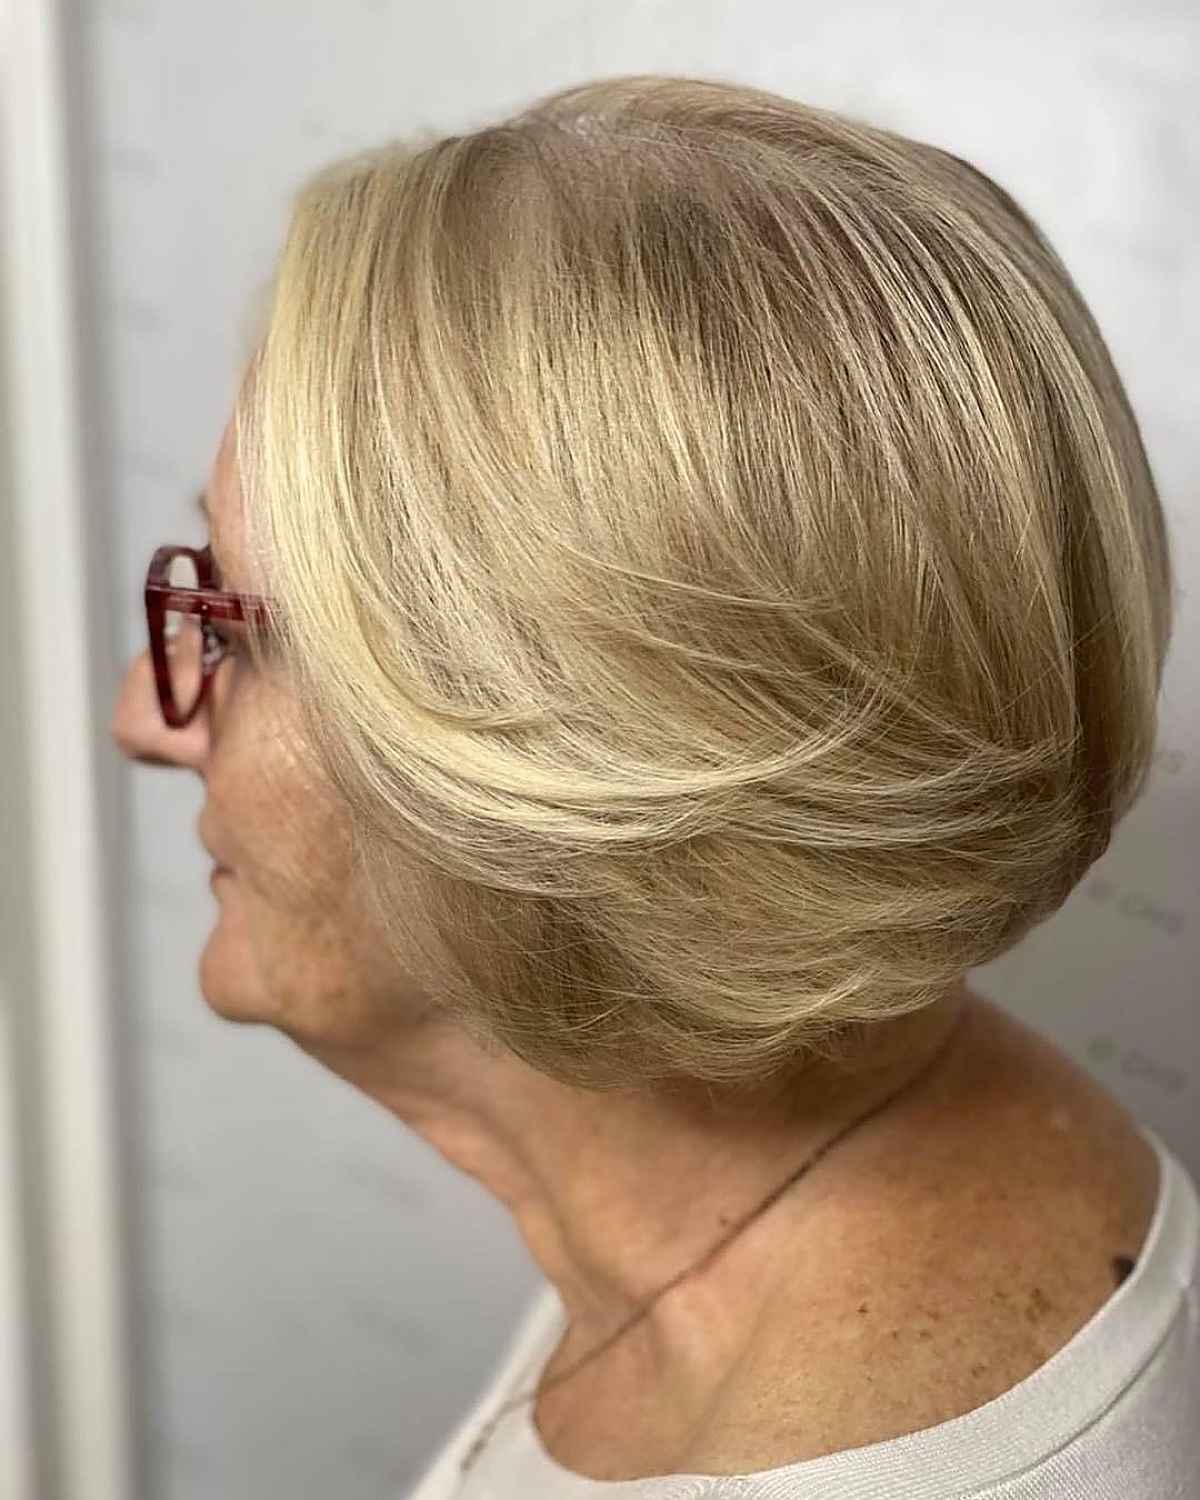 Short Feathered Bob on a women in her sixties